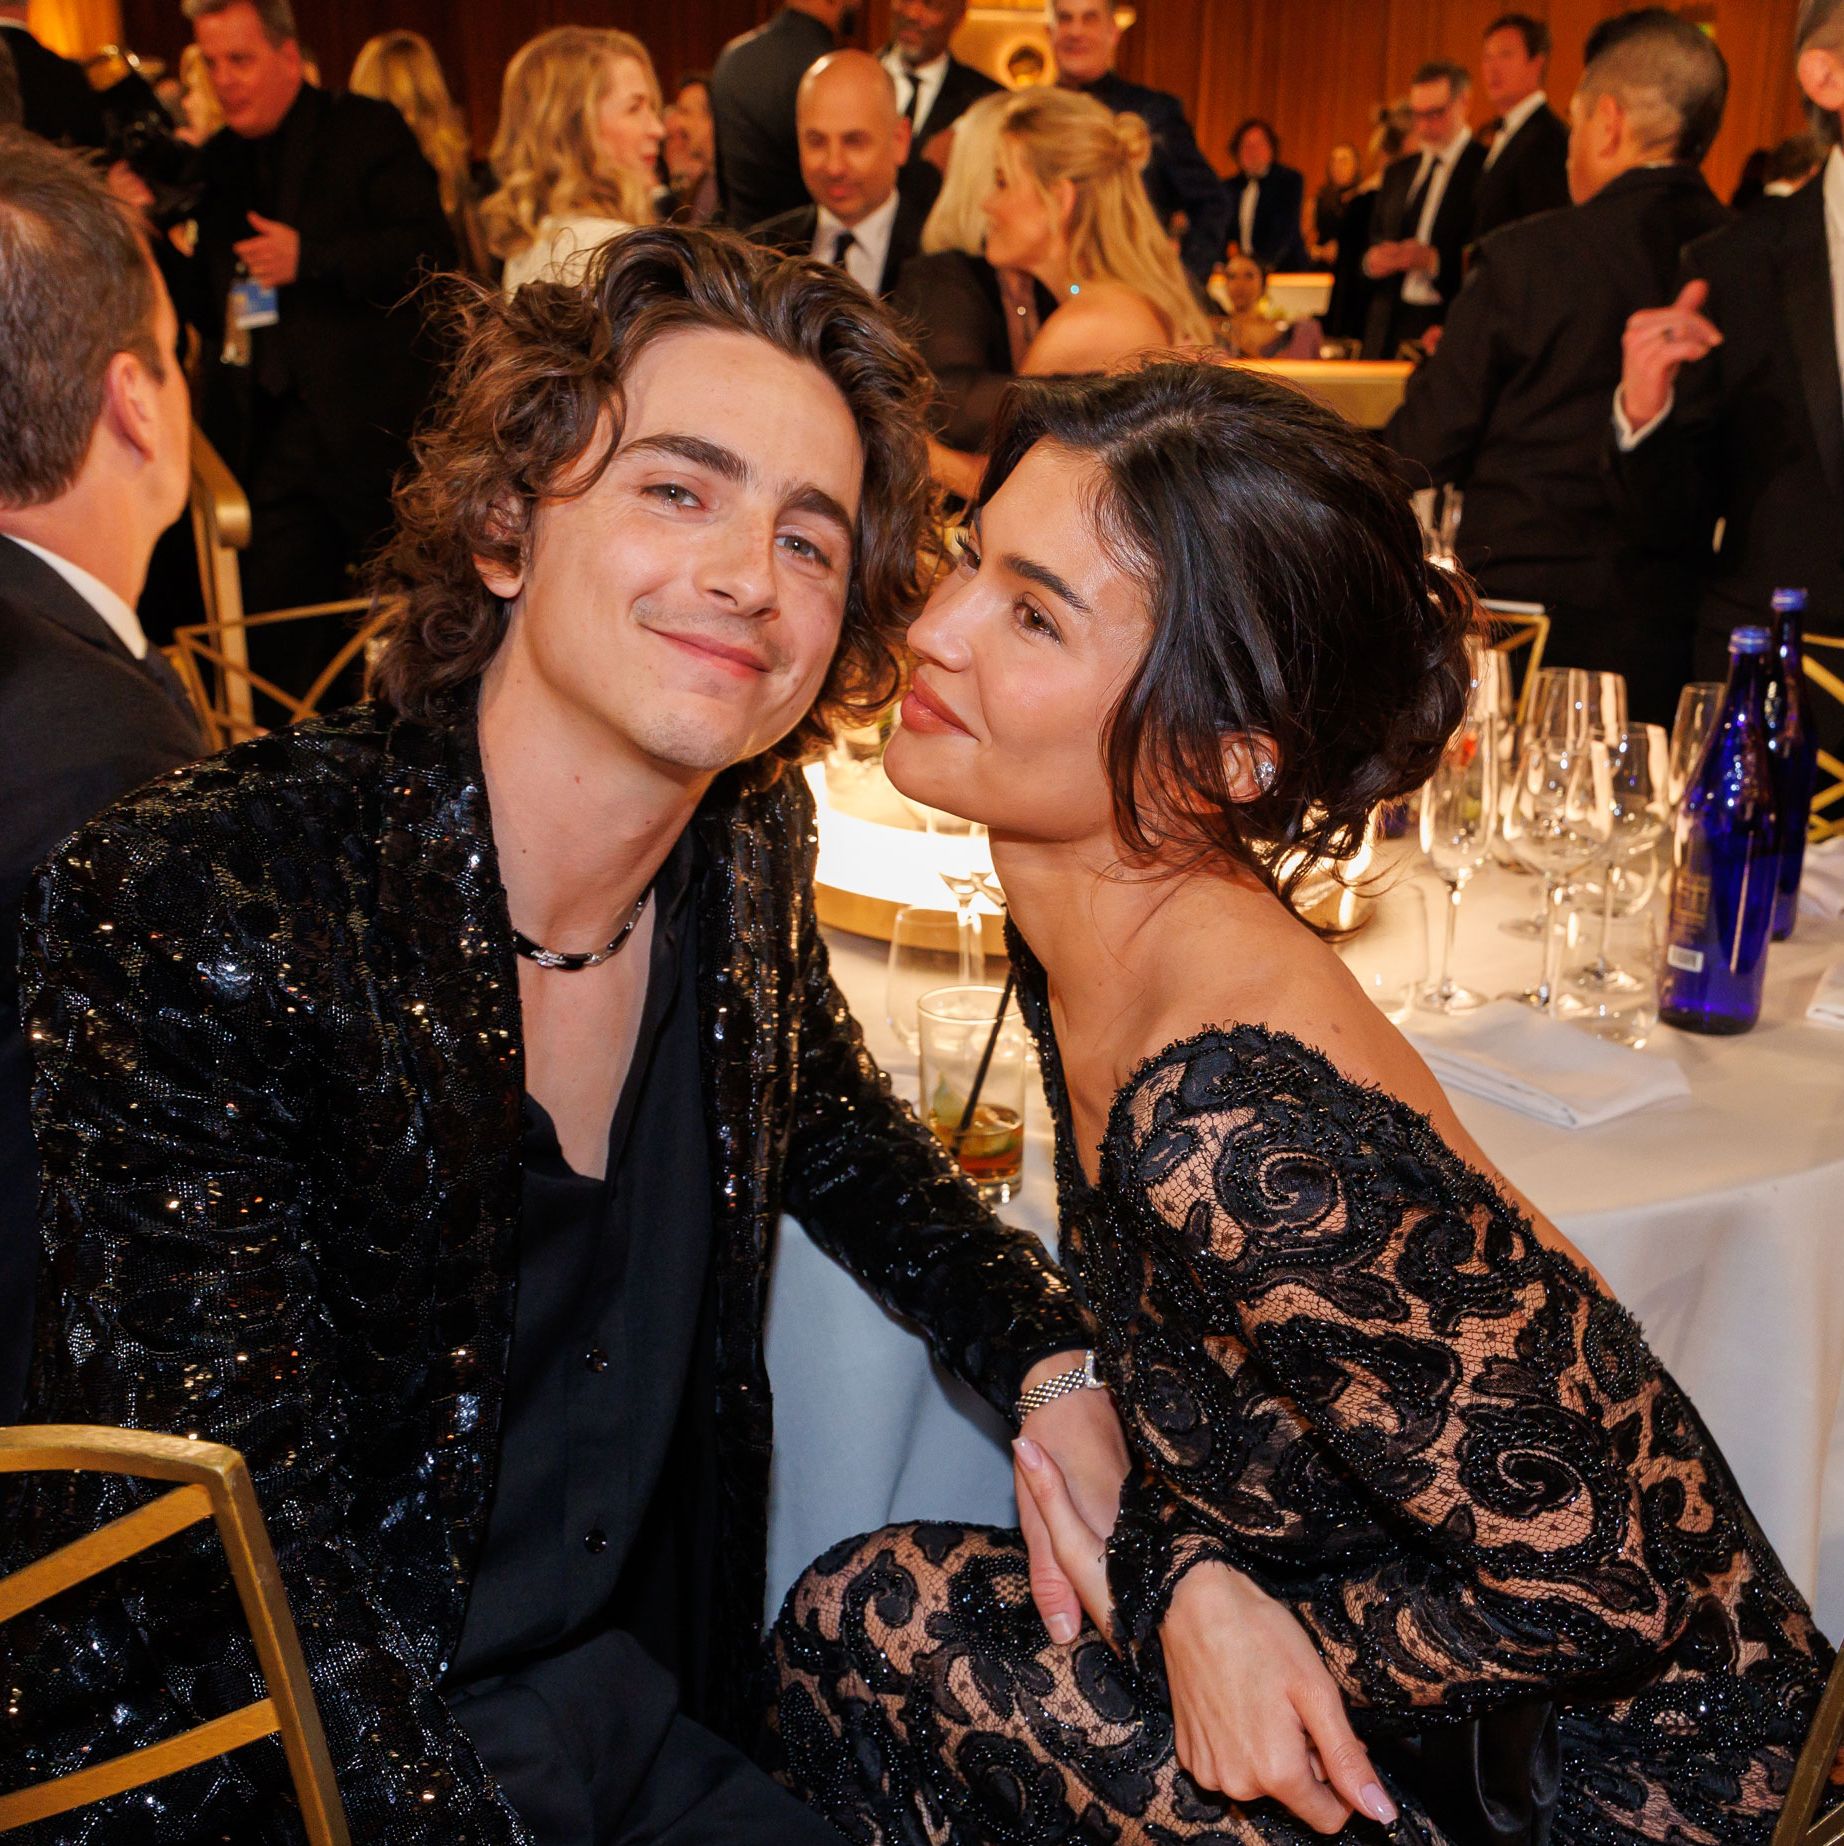 Chalamet and Jenner's kiss wasn't the only romantic moment caught on camera.